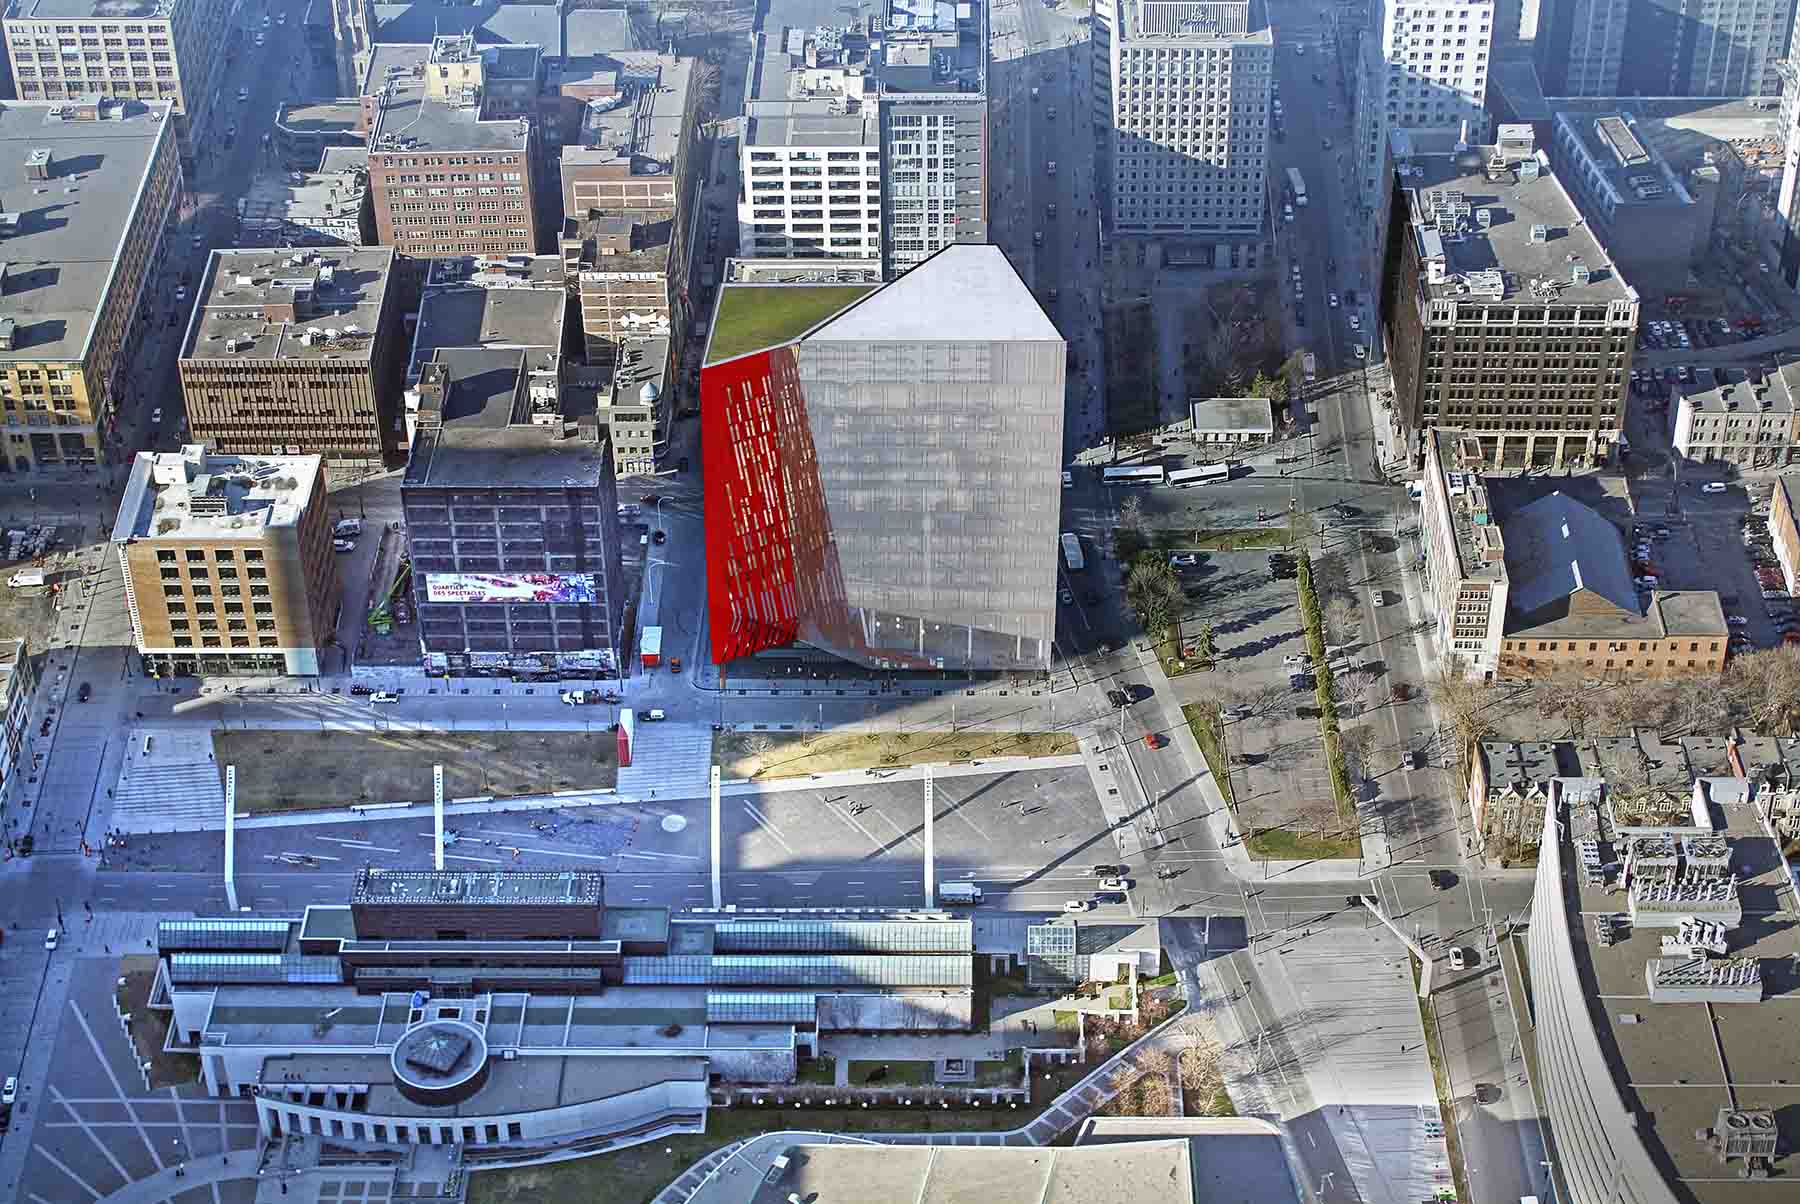 An aerial view of Montreal with the Balmoral building model, which is partially clad in red 